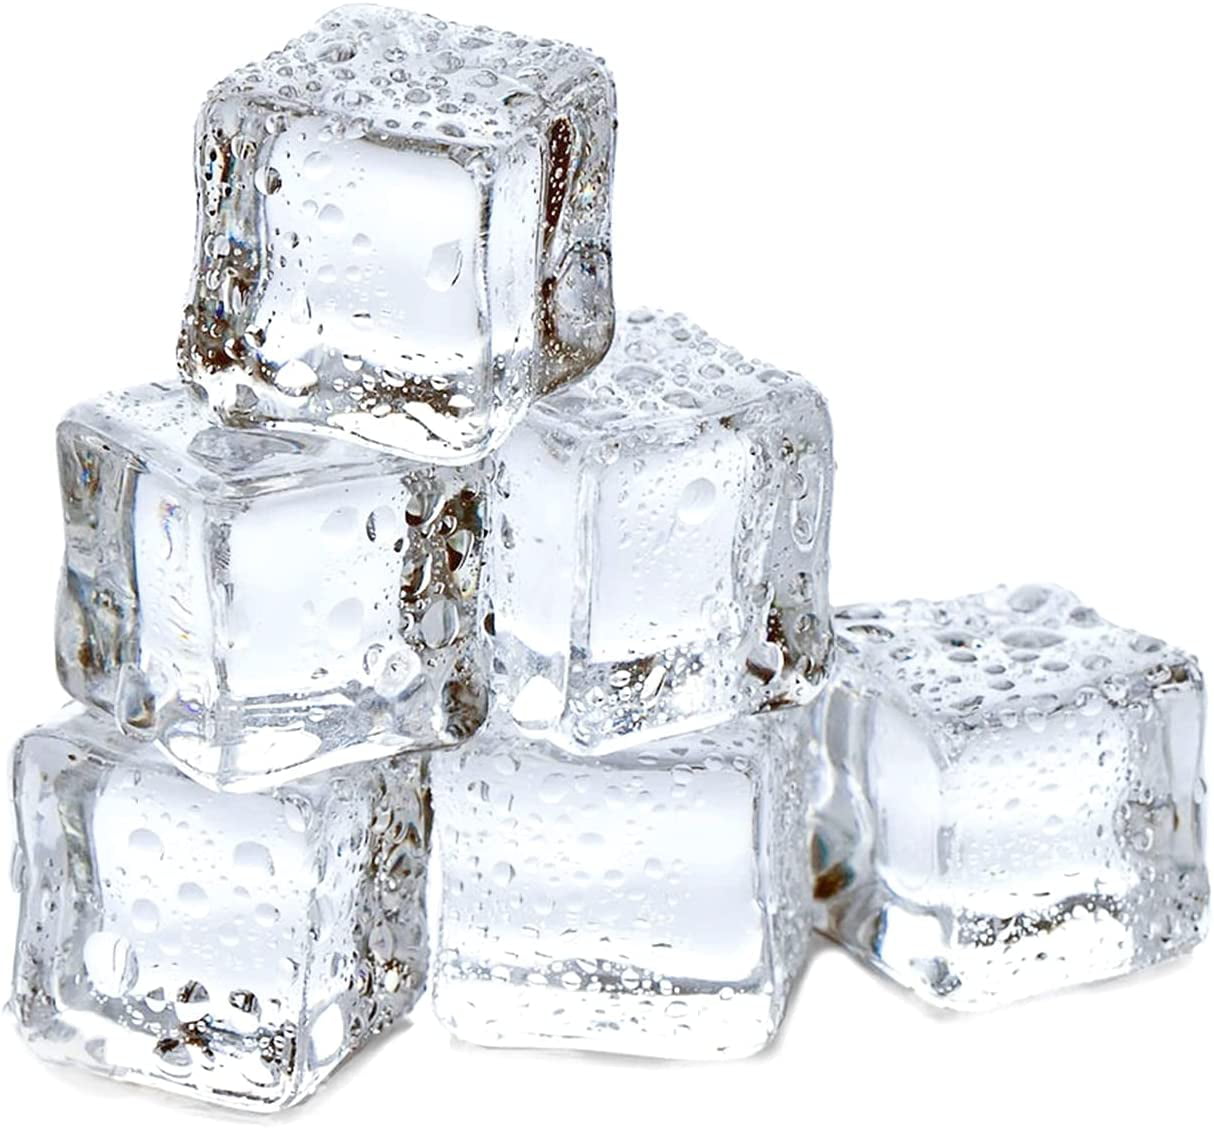 50pcs Clear Fake Artificial Acrylic Ice Cubes Crystal Square Display Party Decor